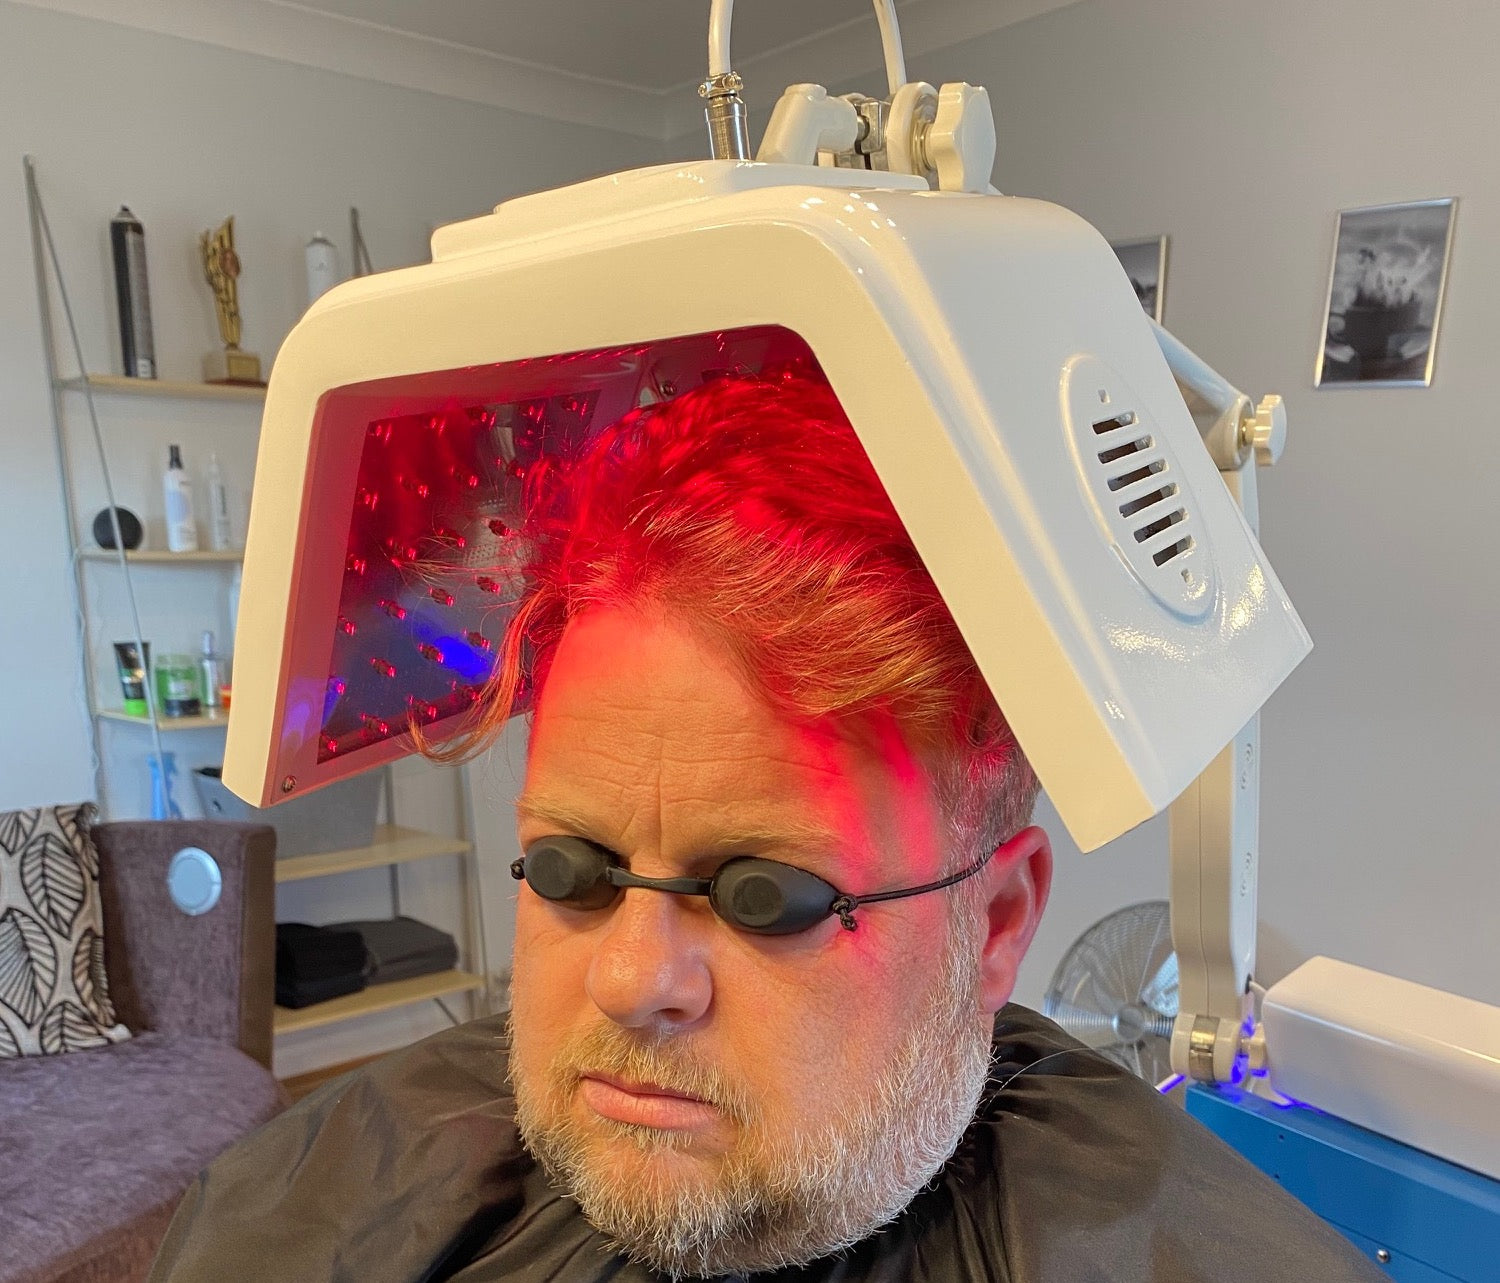 Laser treatment is a low level light treatment to enhance density and hair texture to restore thinning hair in men and women. This treatment is best for clients with early stages of hair loss. Laser treatment used on a regular basis with a lotion applied 